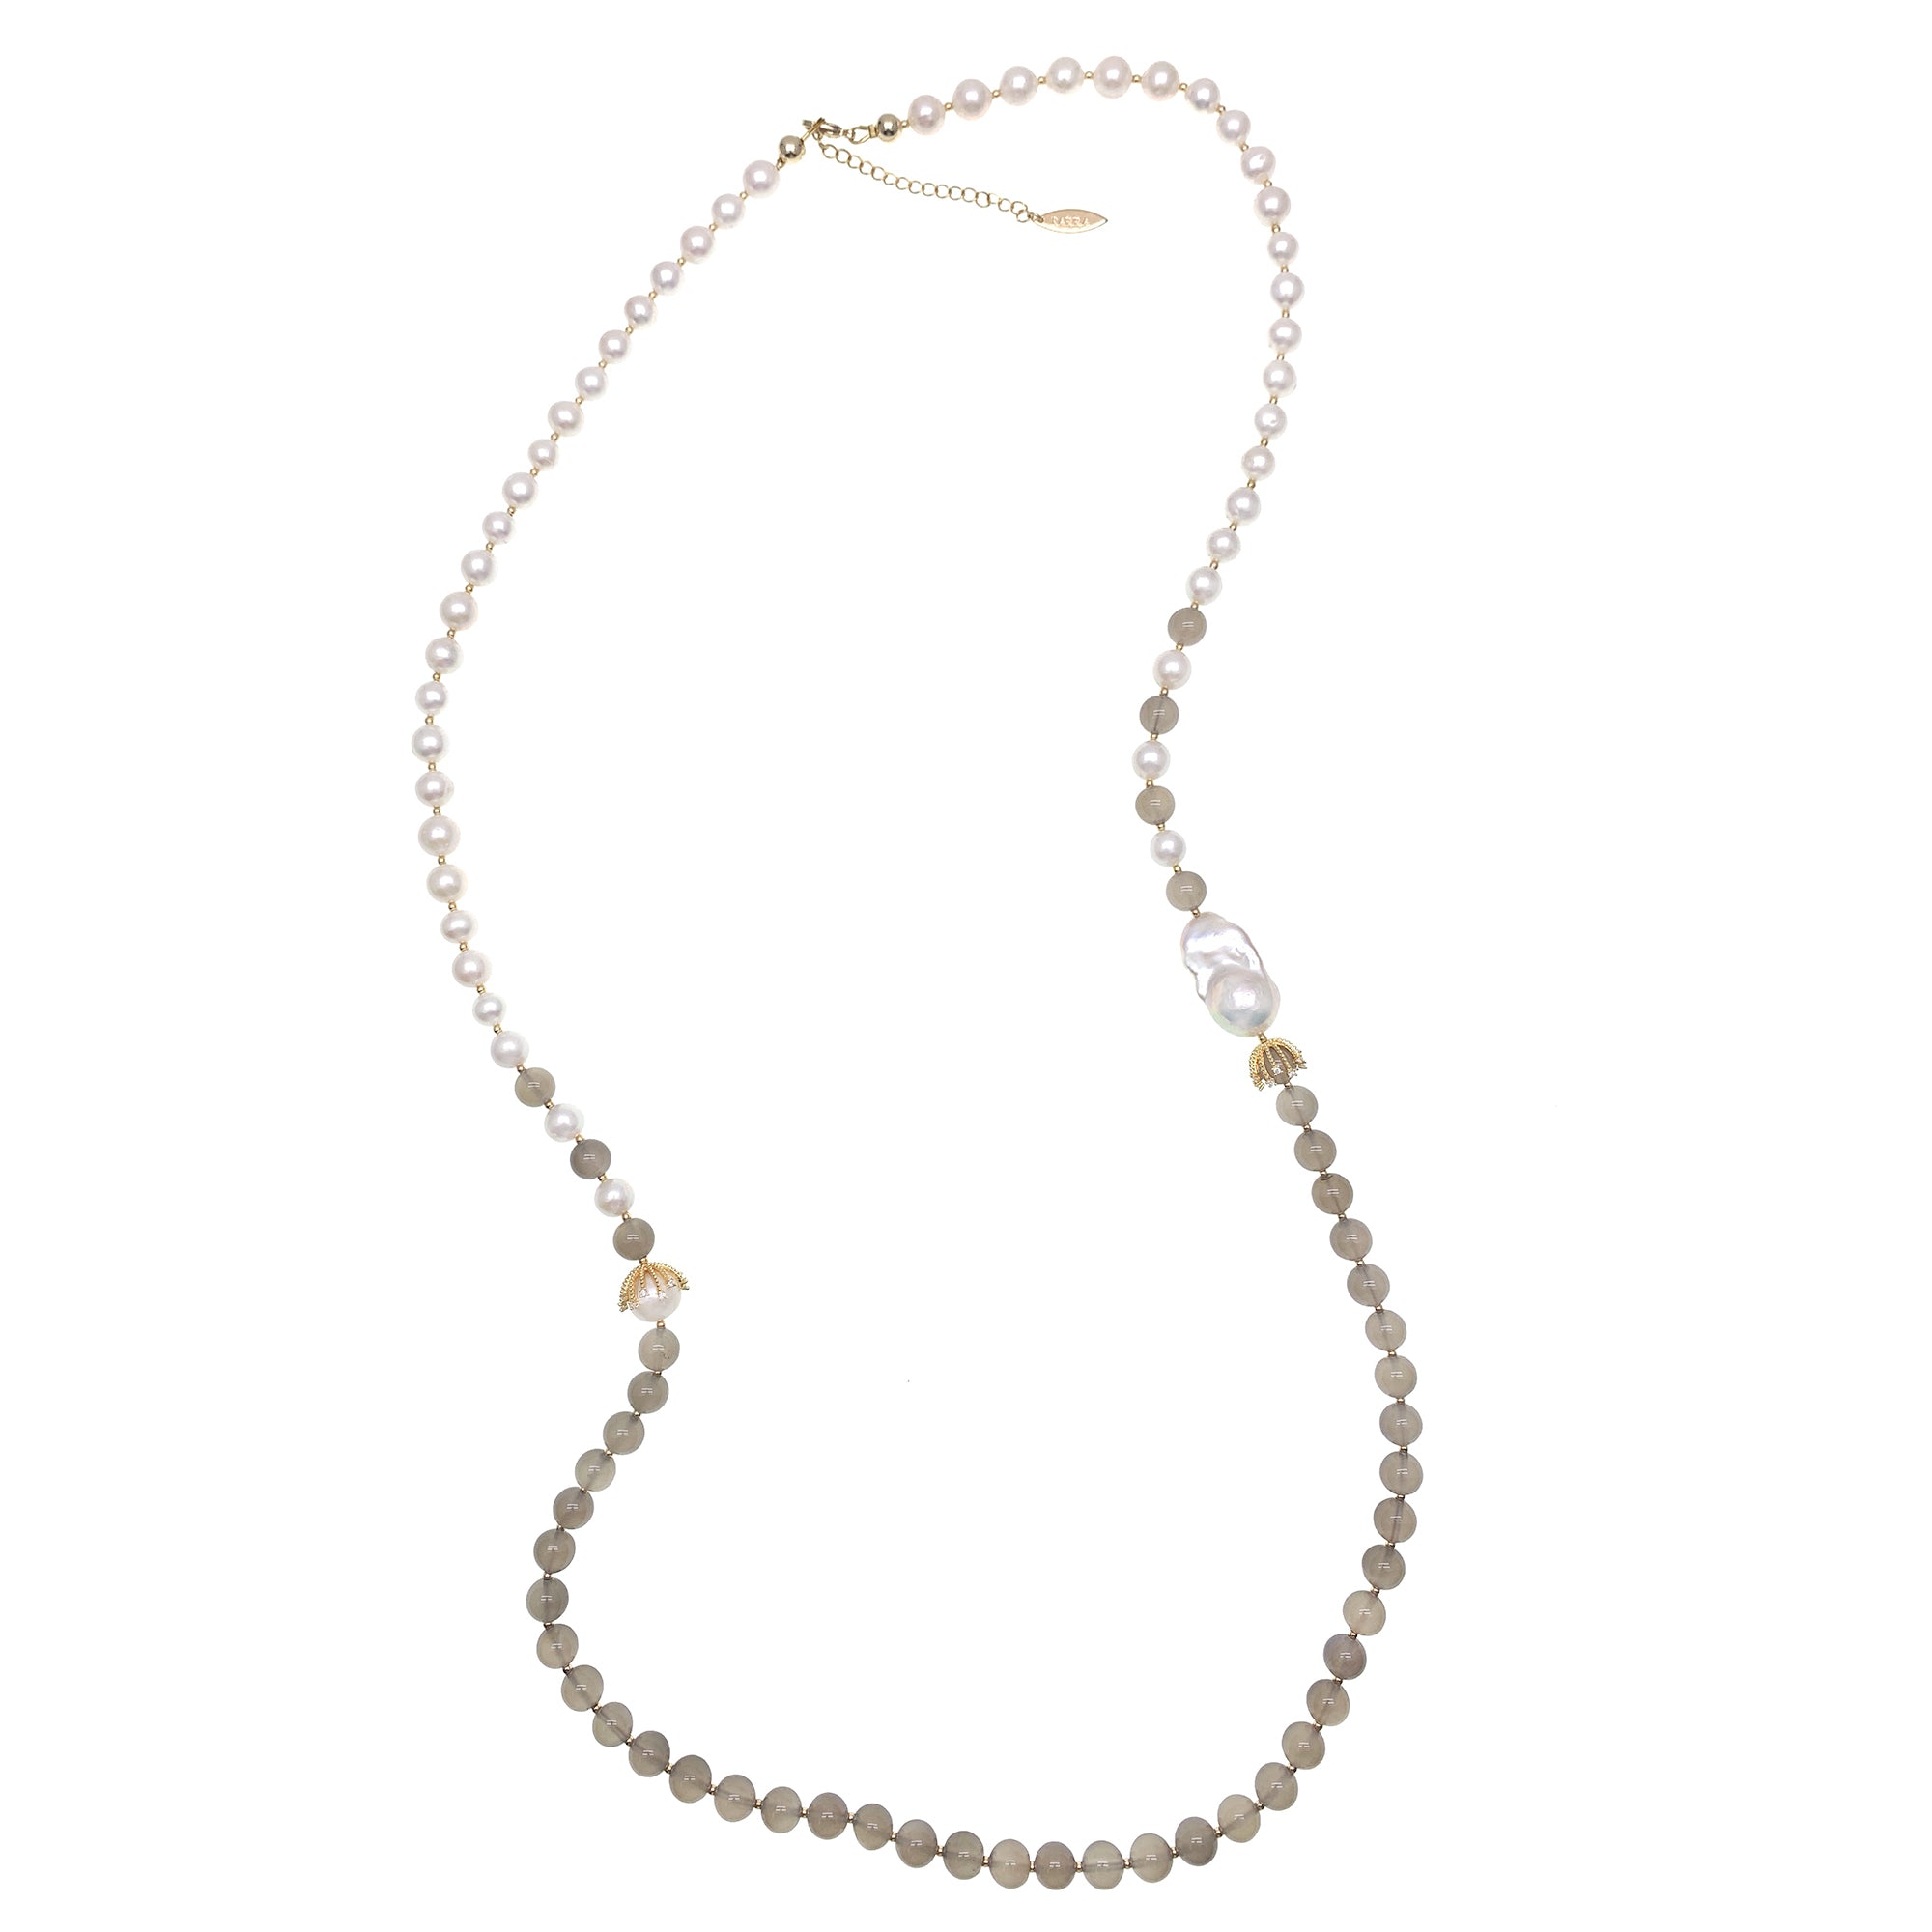 Farra Long Grey Agate and Baroque Pearl Necklace - shop idPearl